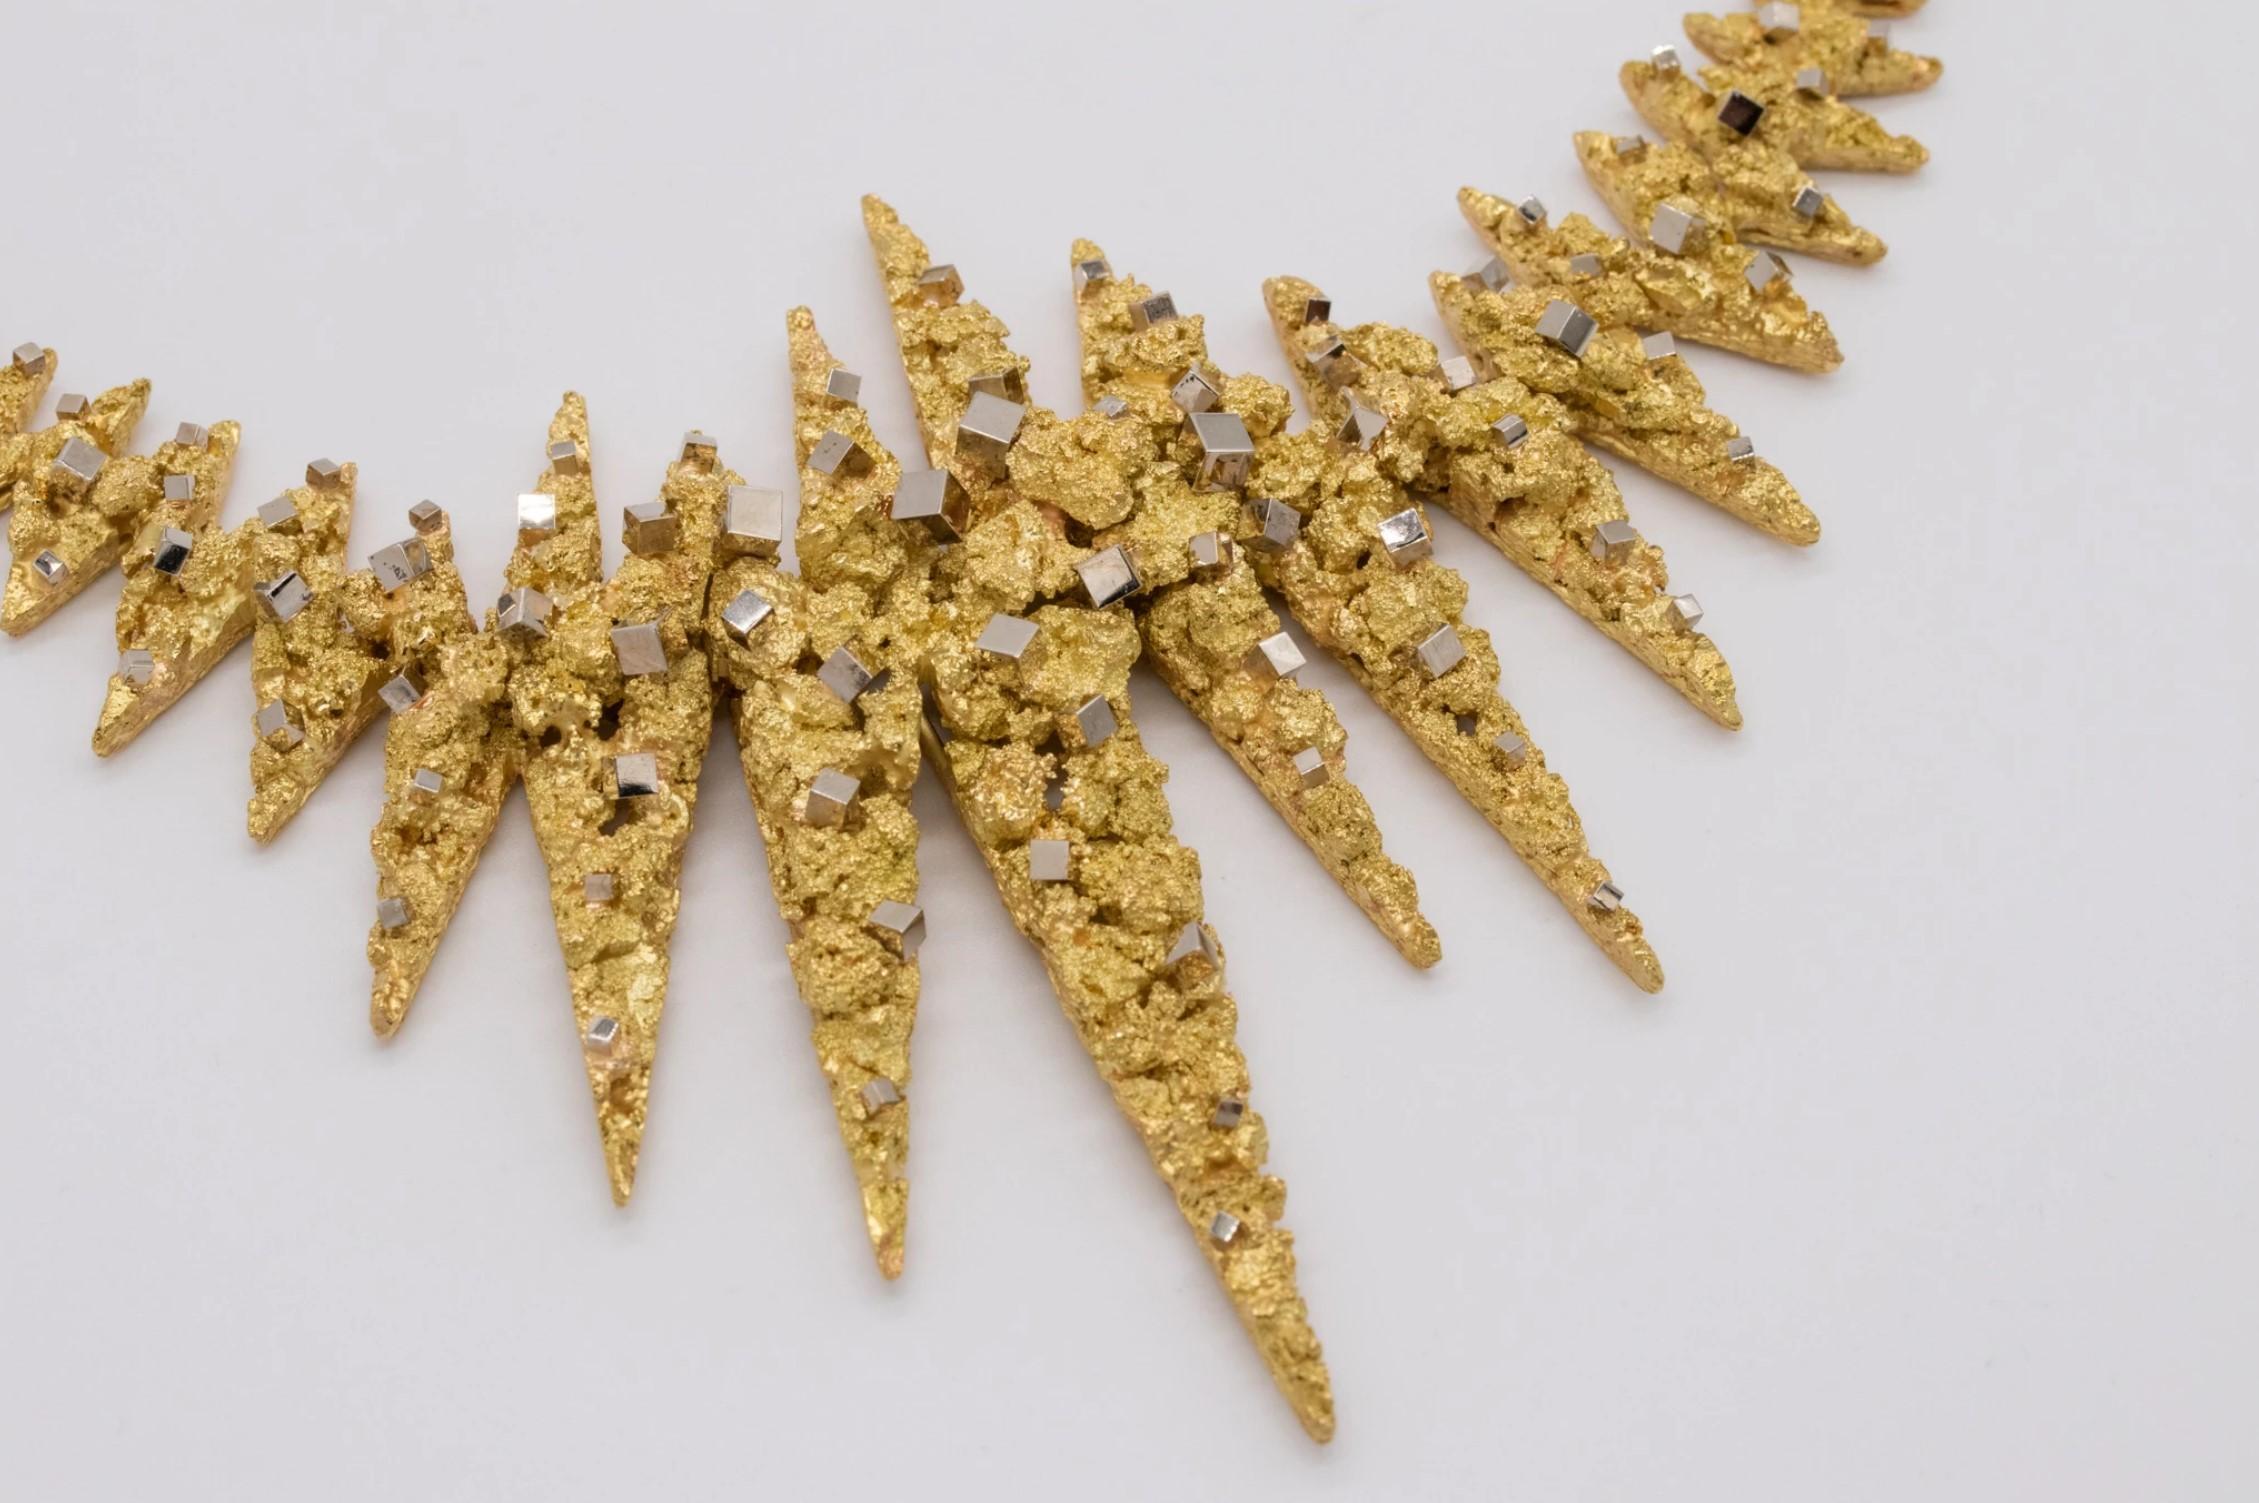 Impressive Stardust necklace designed by Gay Freres.

A rare and one-of-a-kind sculptural vintage piece, created in Switzerland during the post war period, circa 1950. This unusual necklace has been conceived as an stardust explosion with spikes by